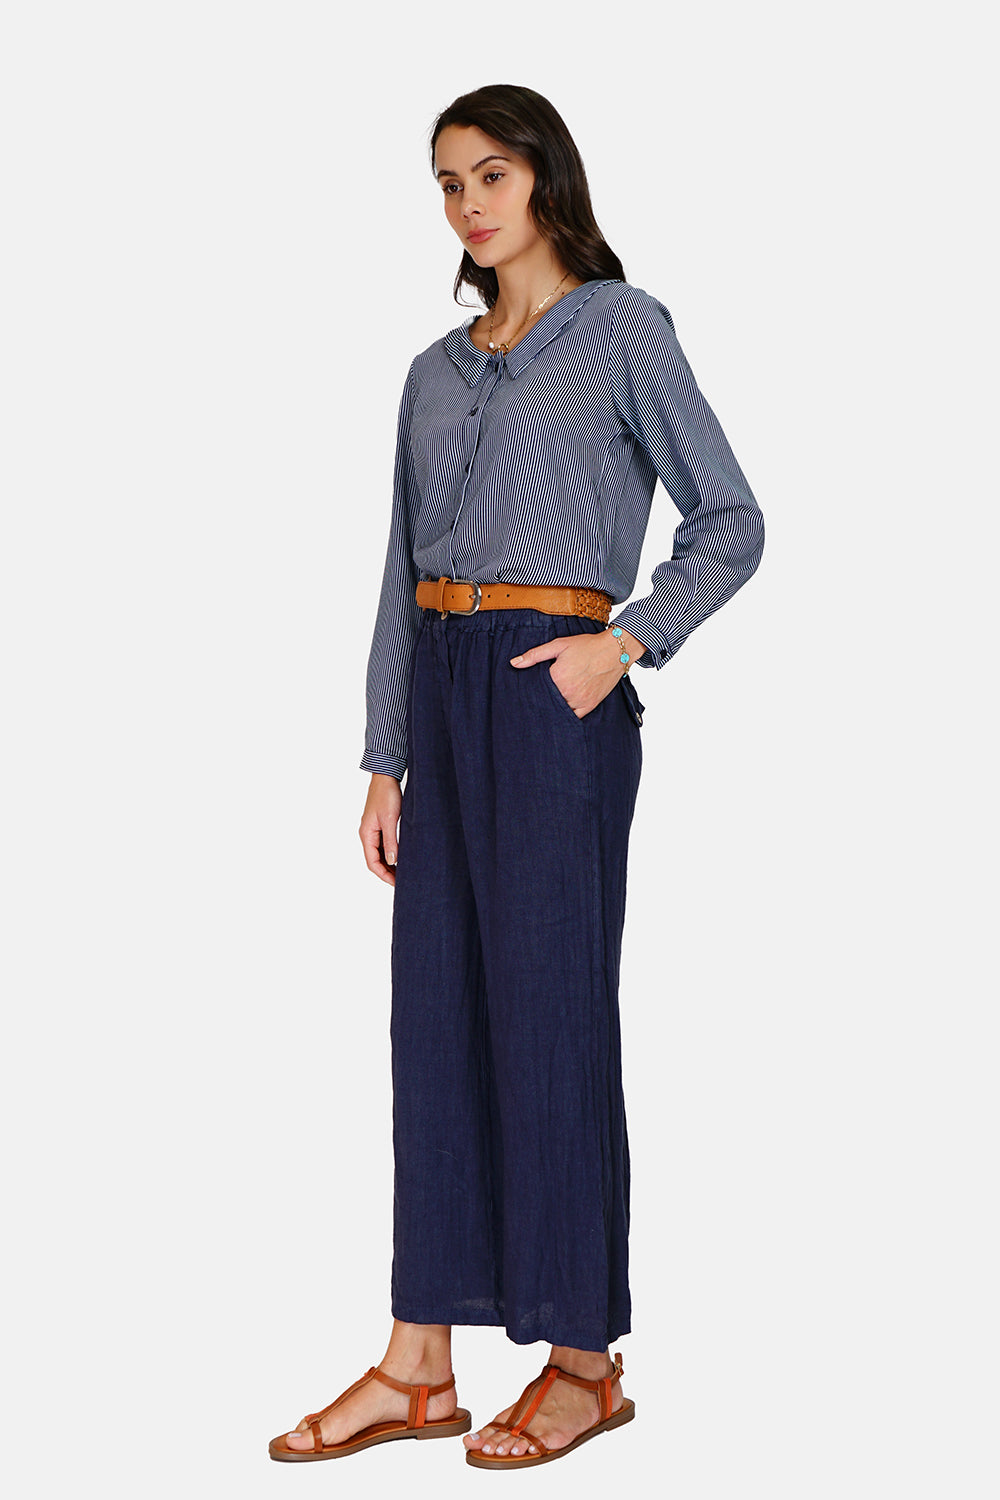 High-waisted wide-leg pants, front zip fastening, side pockets and back pocket tabs